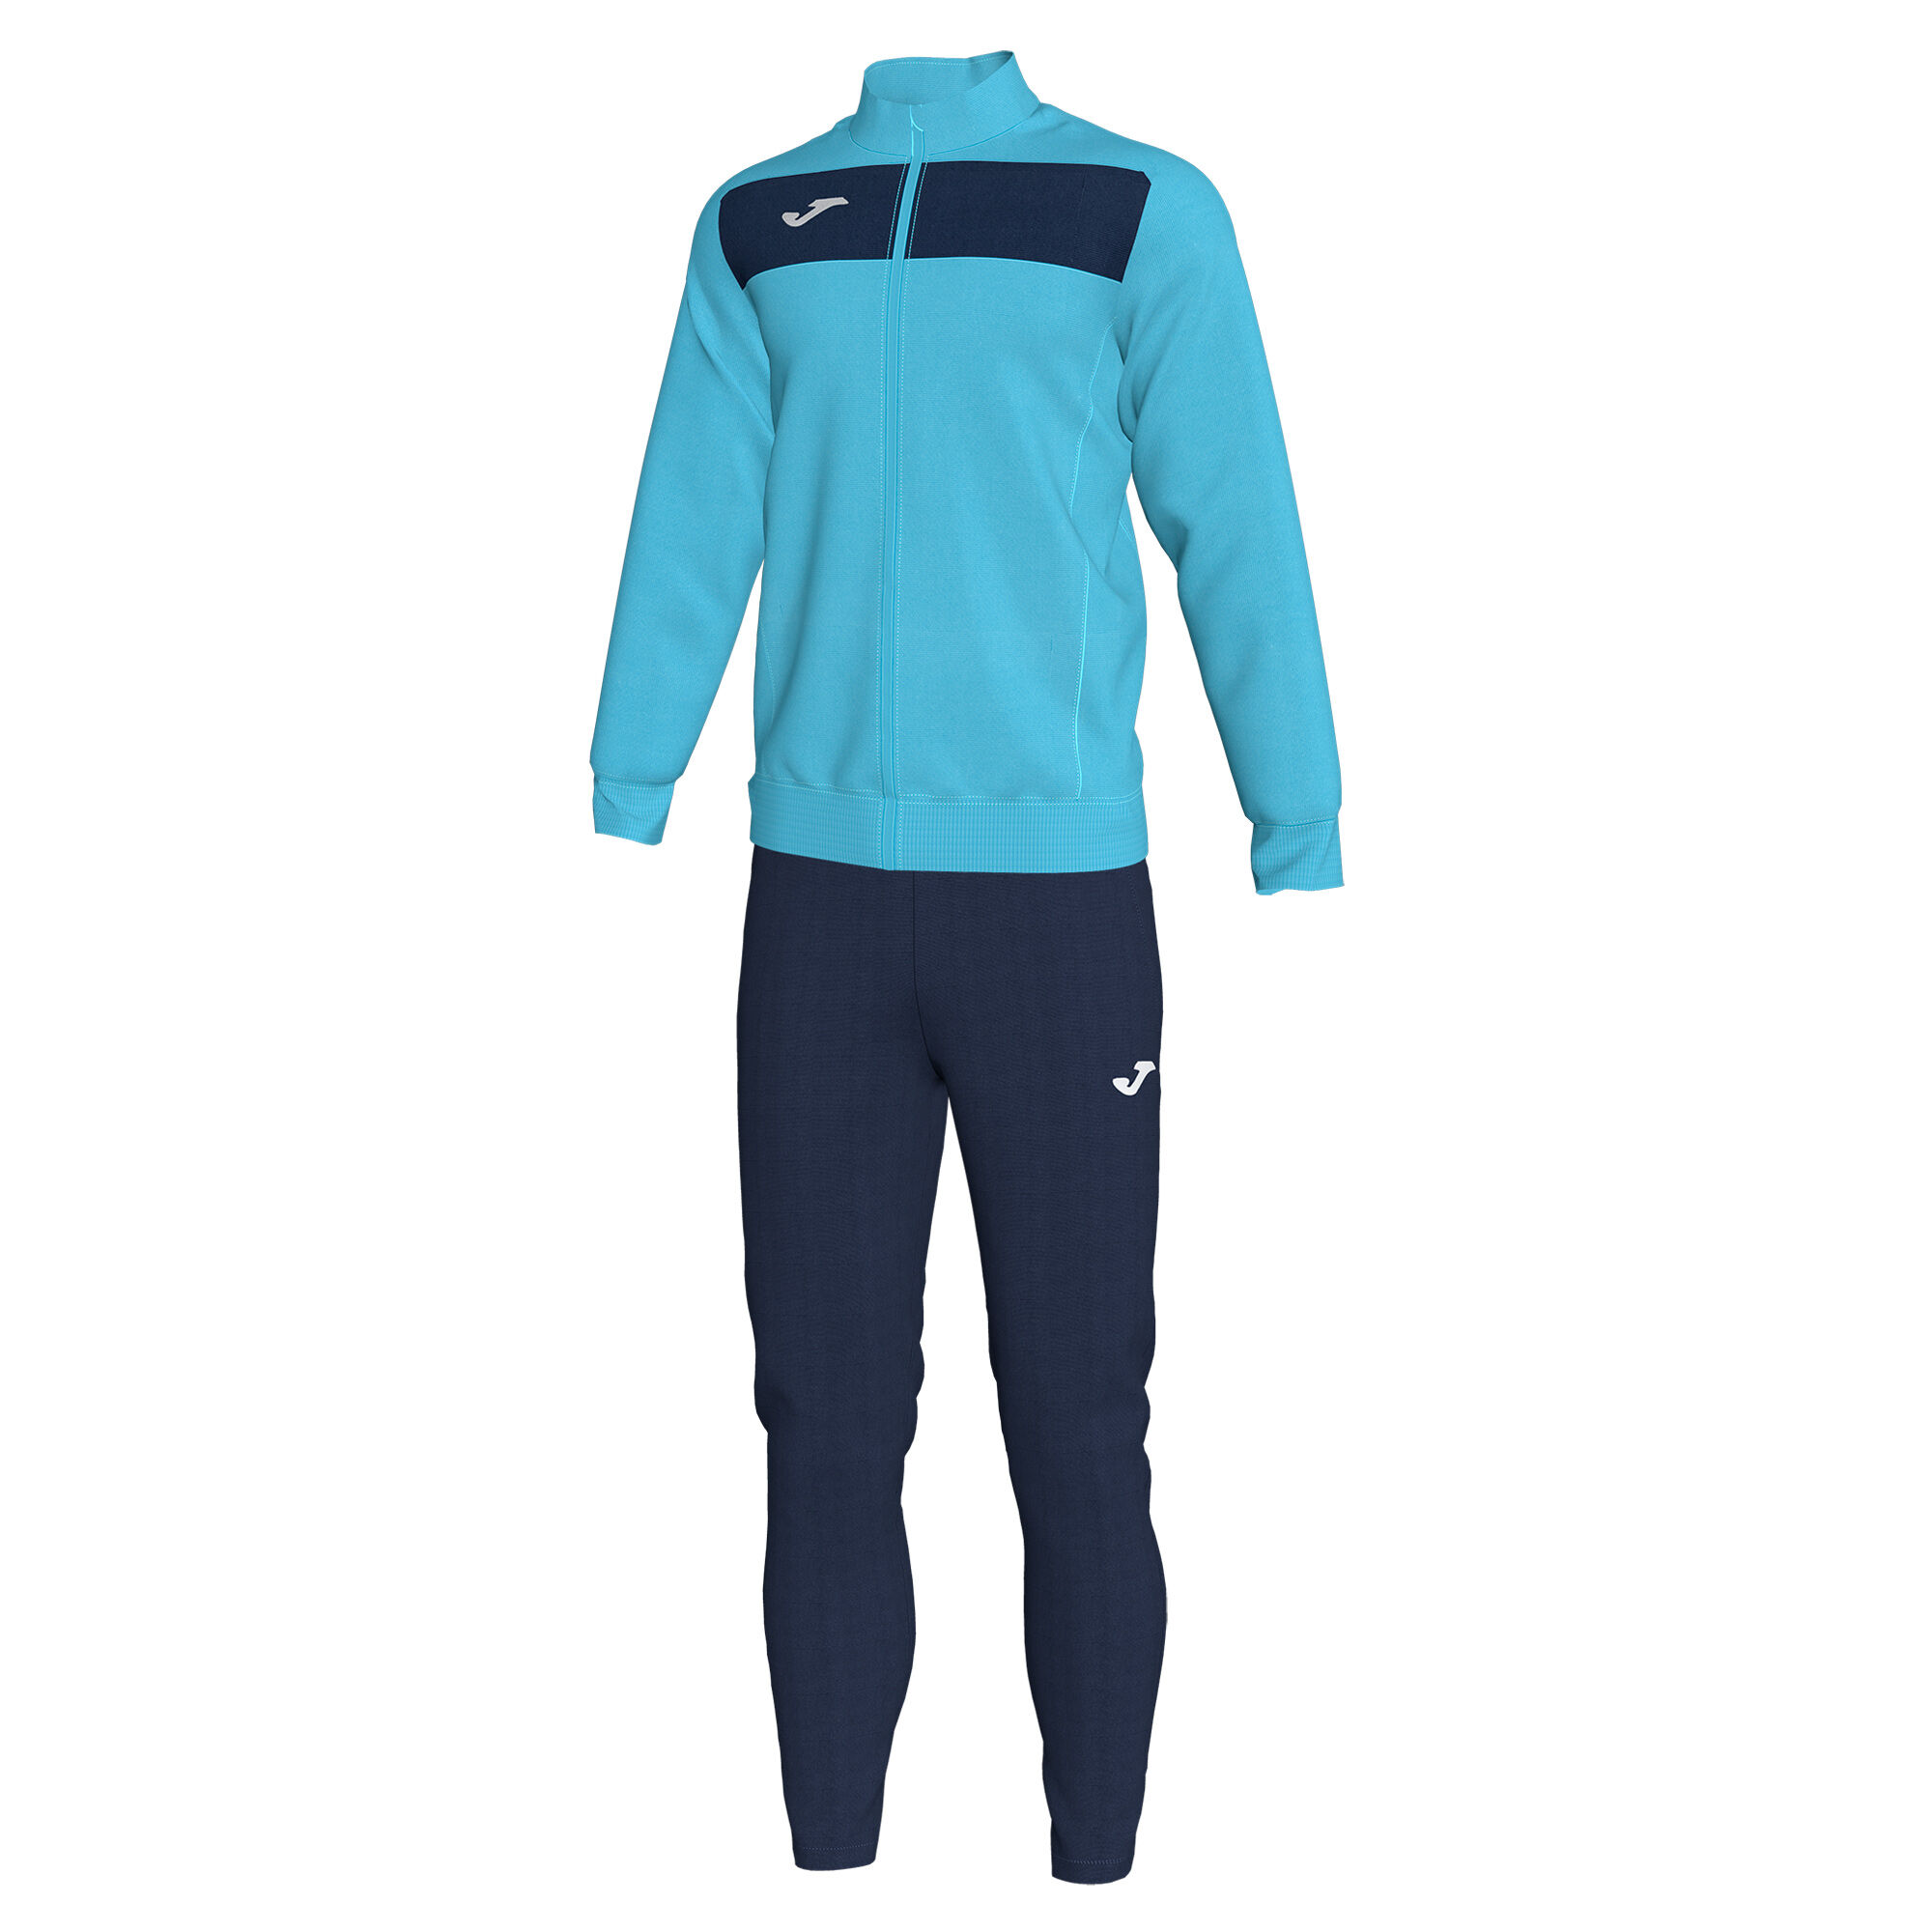 TRACKSUIT MAN ACADEMY II FLUORESCENT TURQUOISE NAVY BLUE